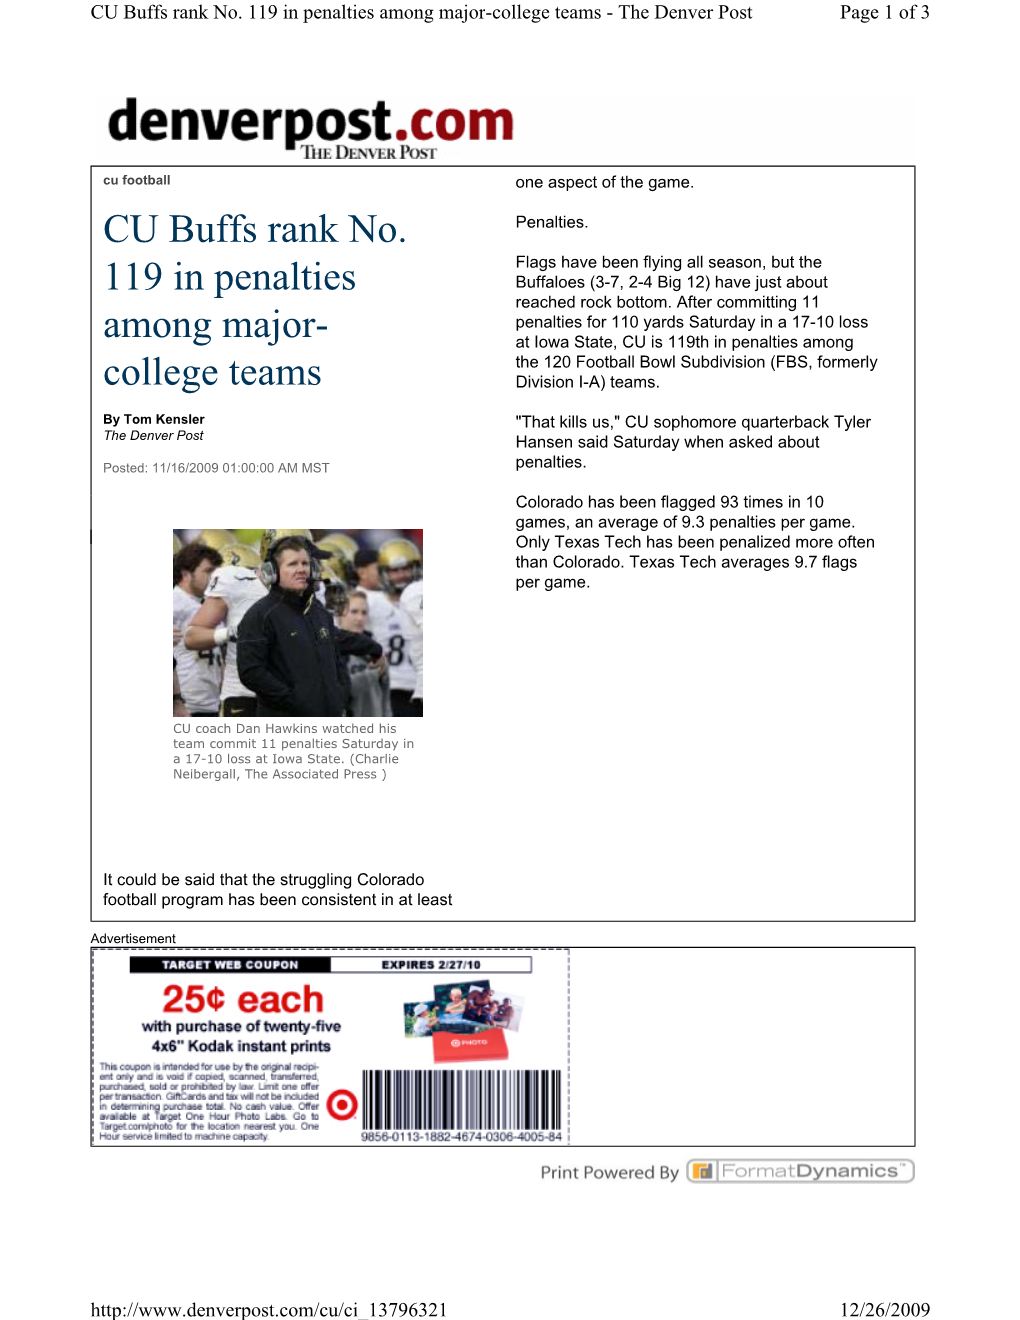 CU Buffs Rank No. 119 in Penalties Among Major-College Teams - the Denver Post Page 1 of 3